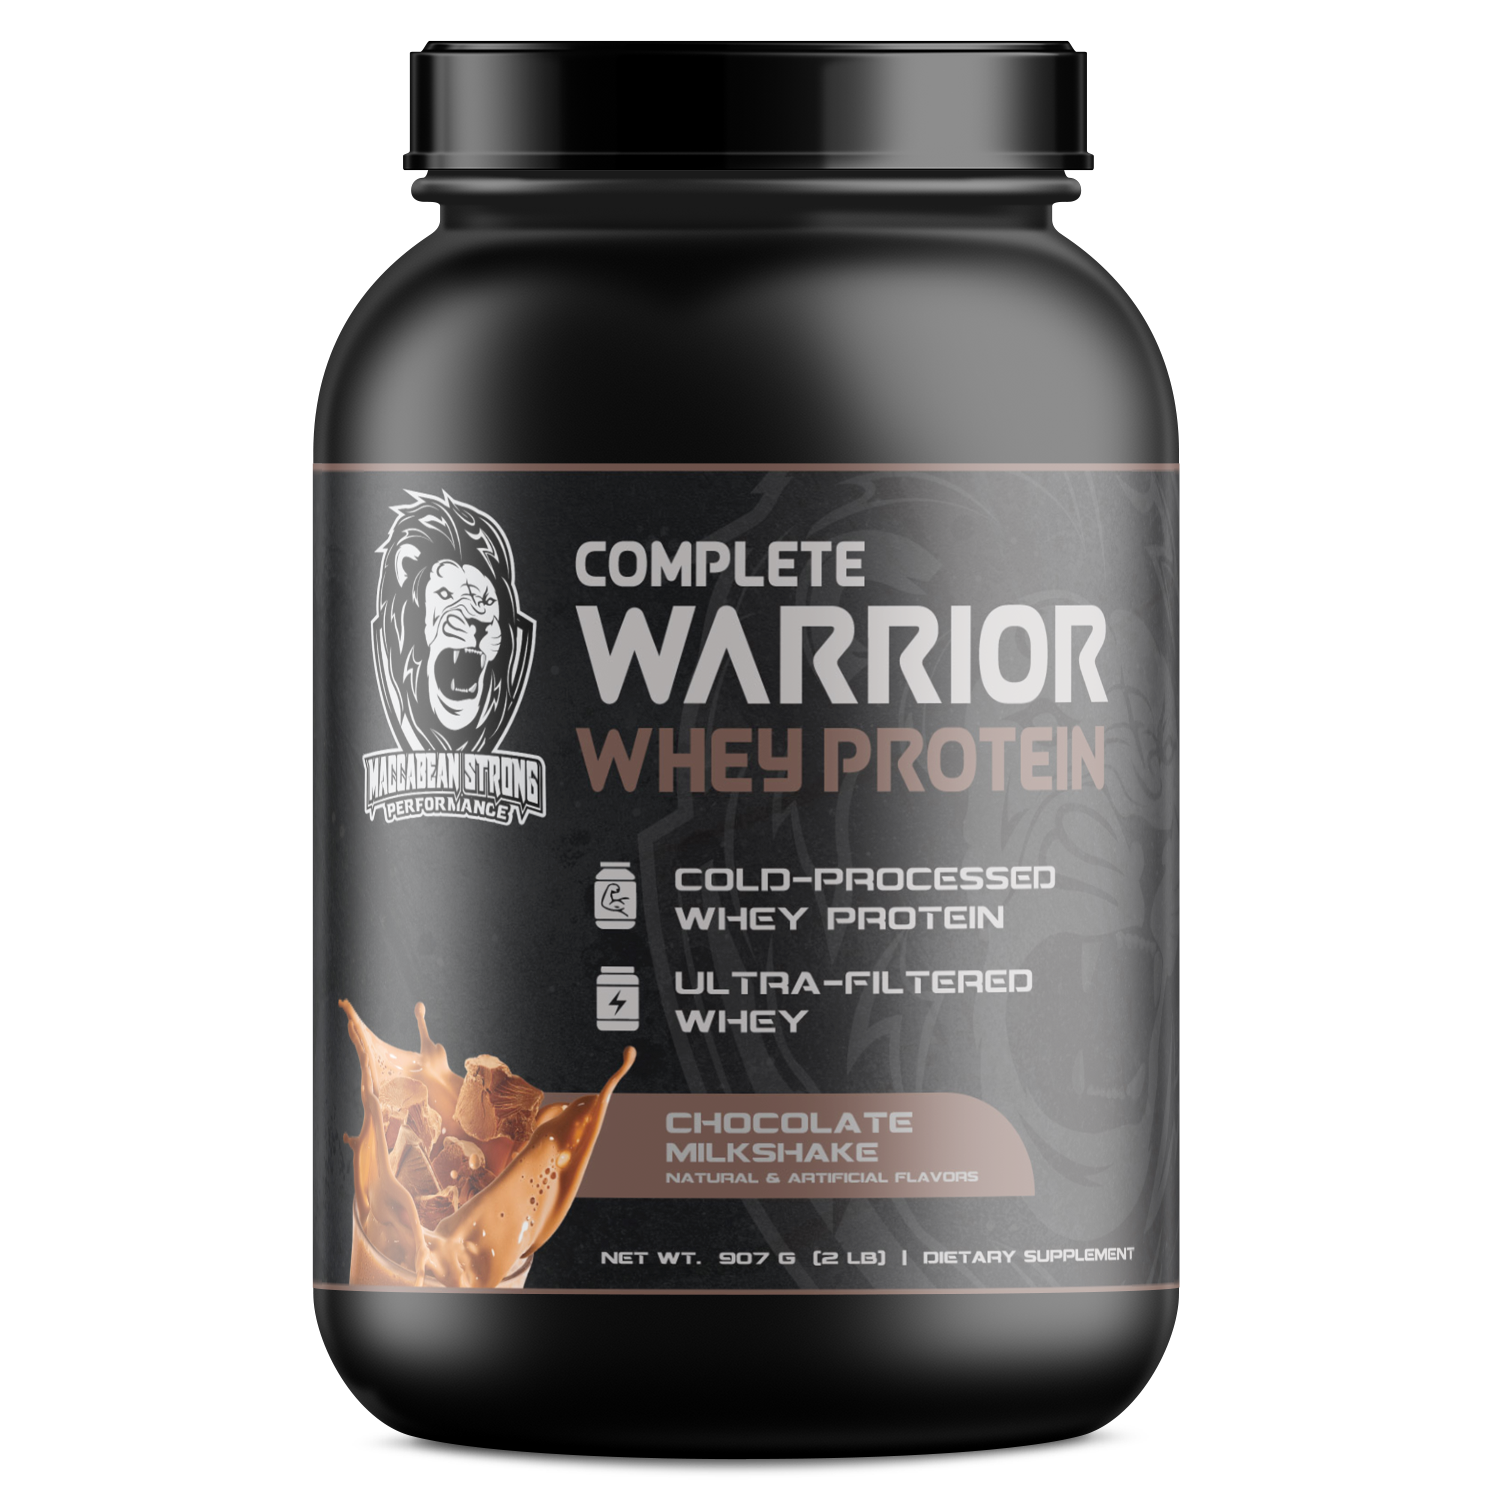 Complete Warrior Whey Protein 2LB Chocolate